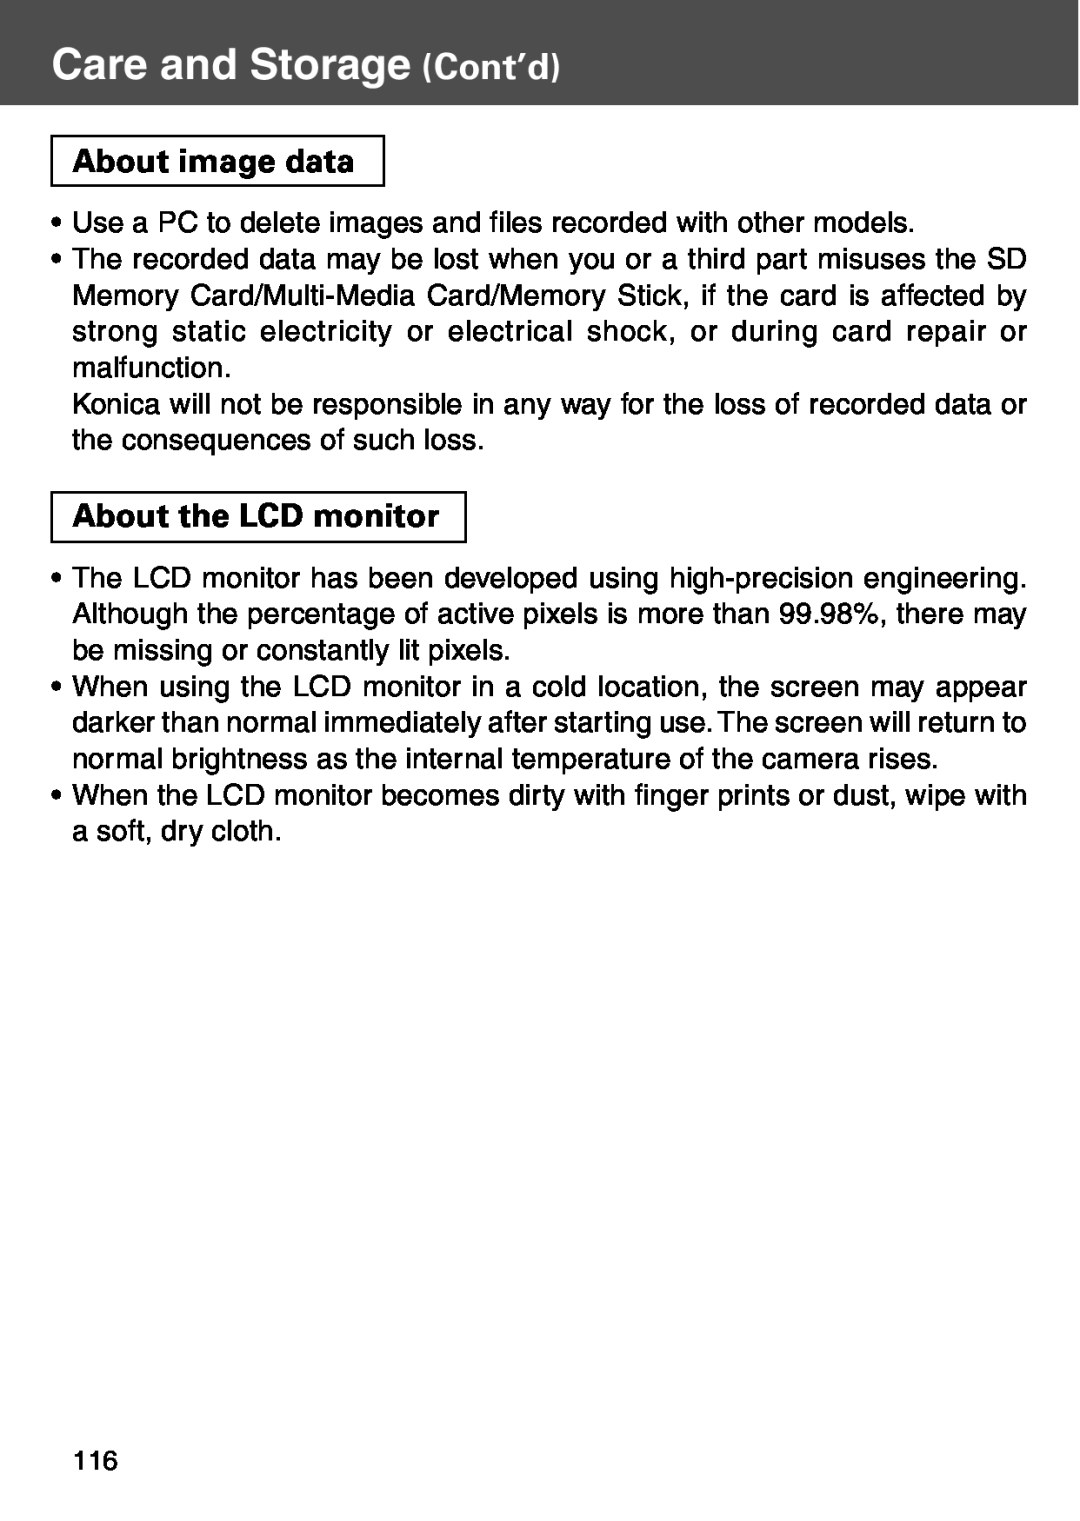 Konica Minolta KD-500Z user manual Care and Storage Cont’d, About image data, About the LCD monitor 